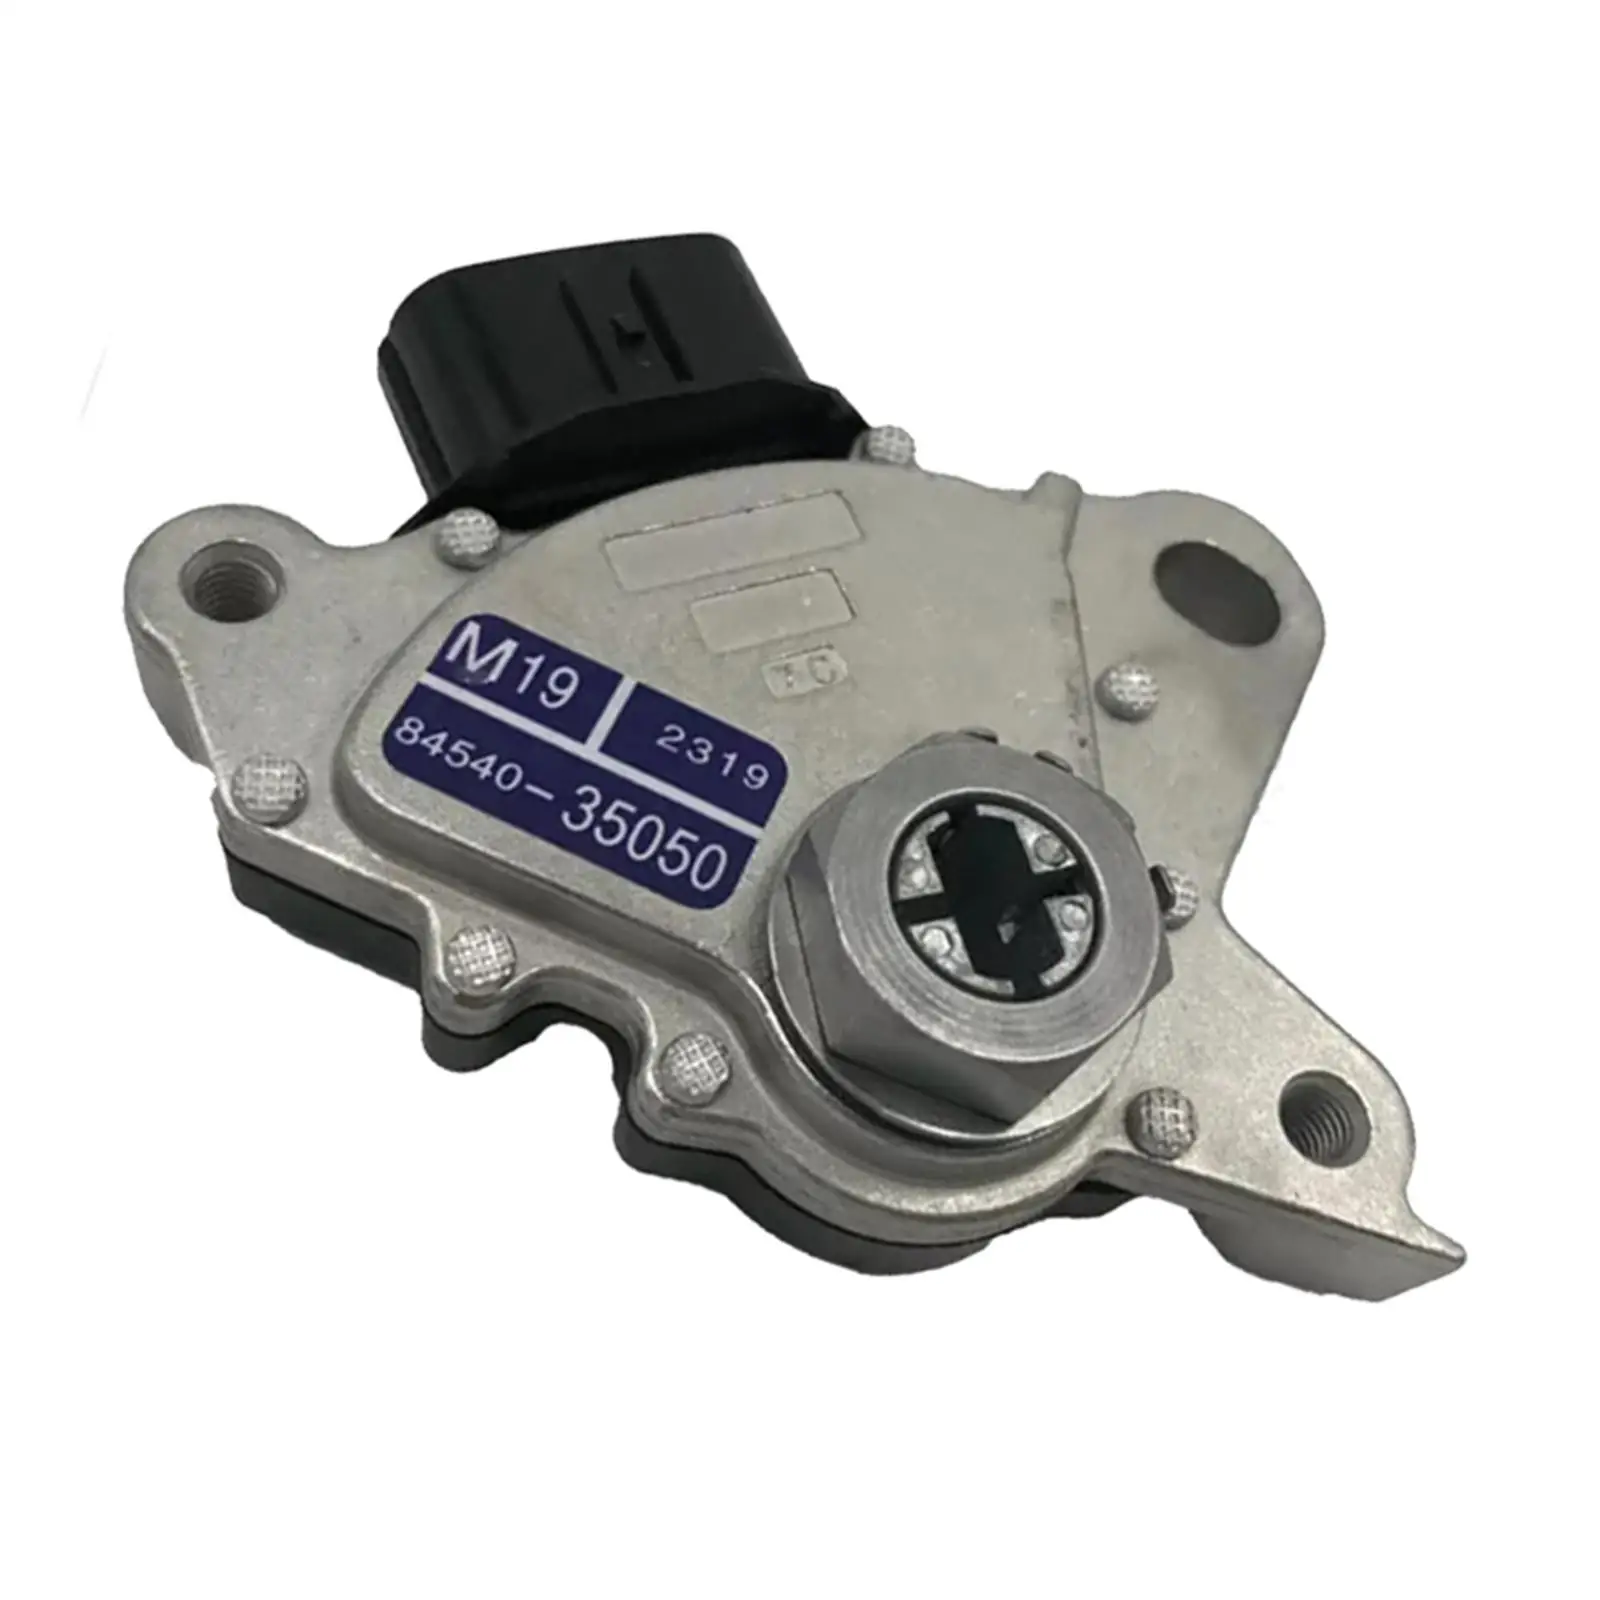 SW4984 Automatic Transmission Neutral Start Switch for Toyota Tacoma Accessory Easy to Install Automotive Premium